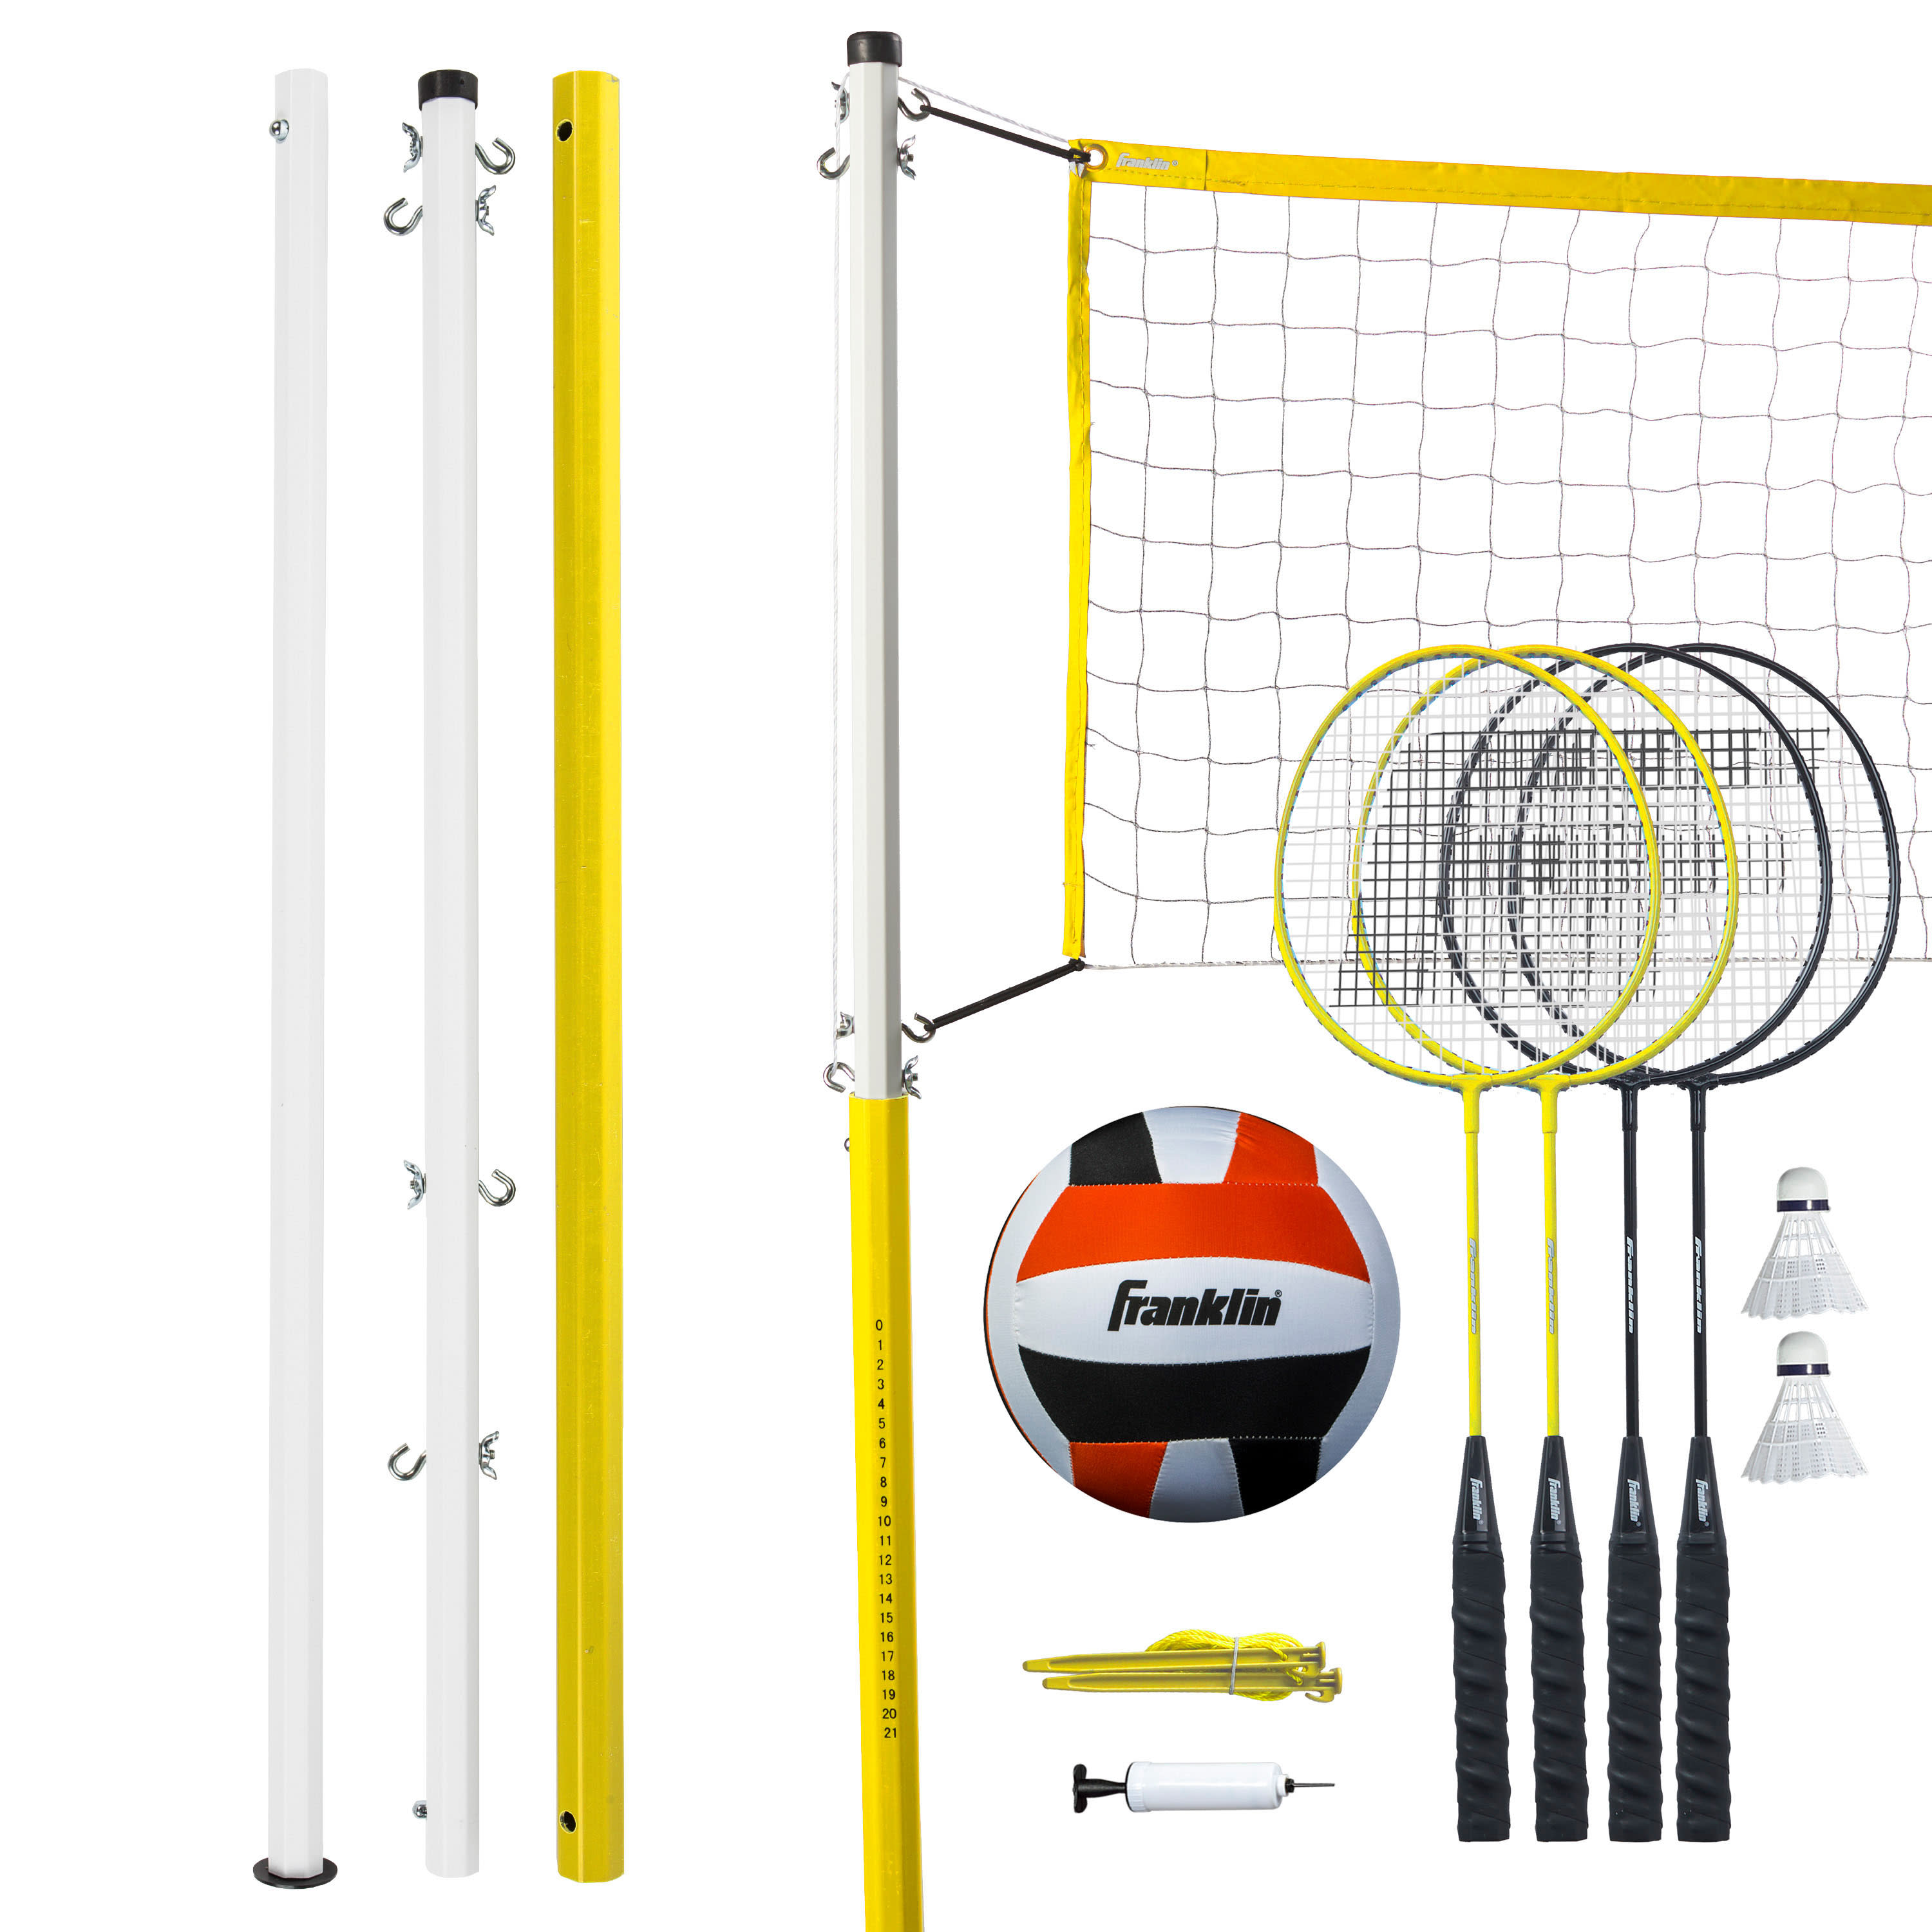 Franklin® Sports Badminton and Volleyball Set